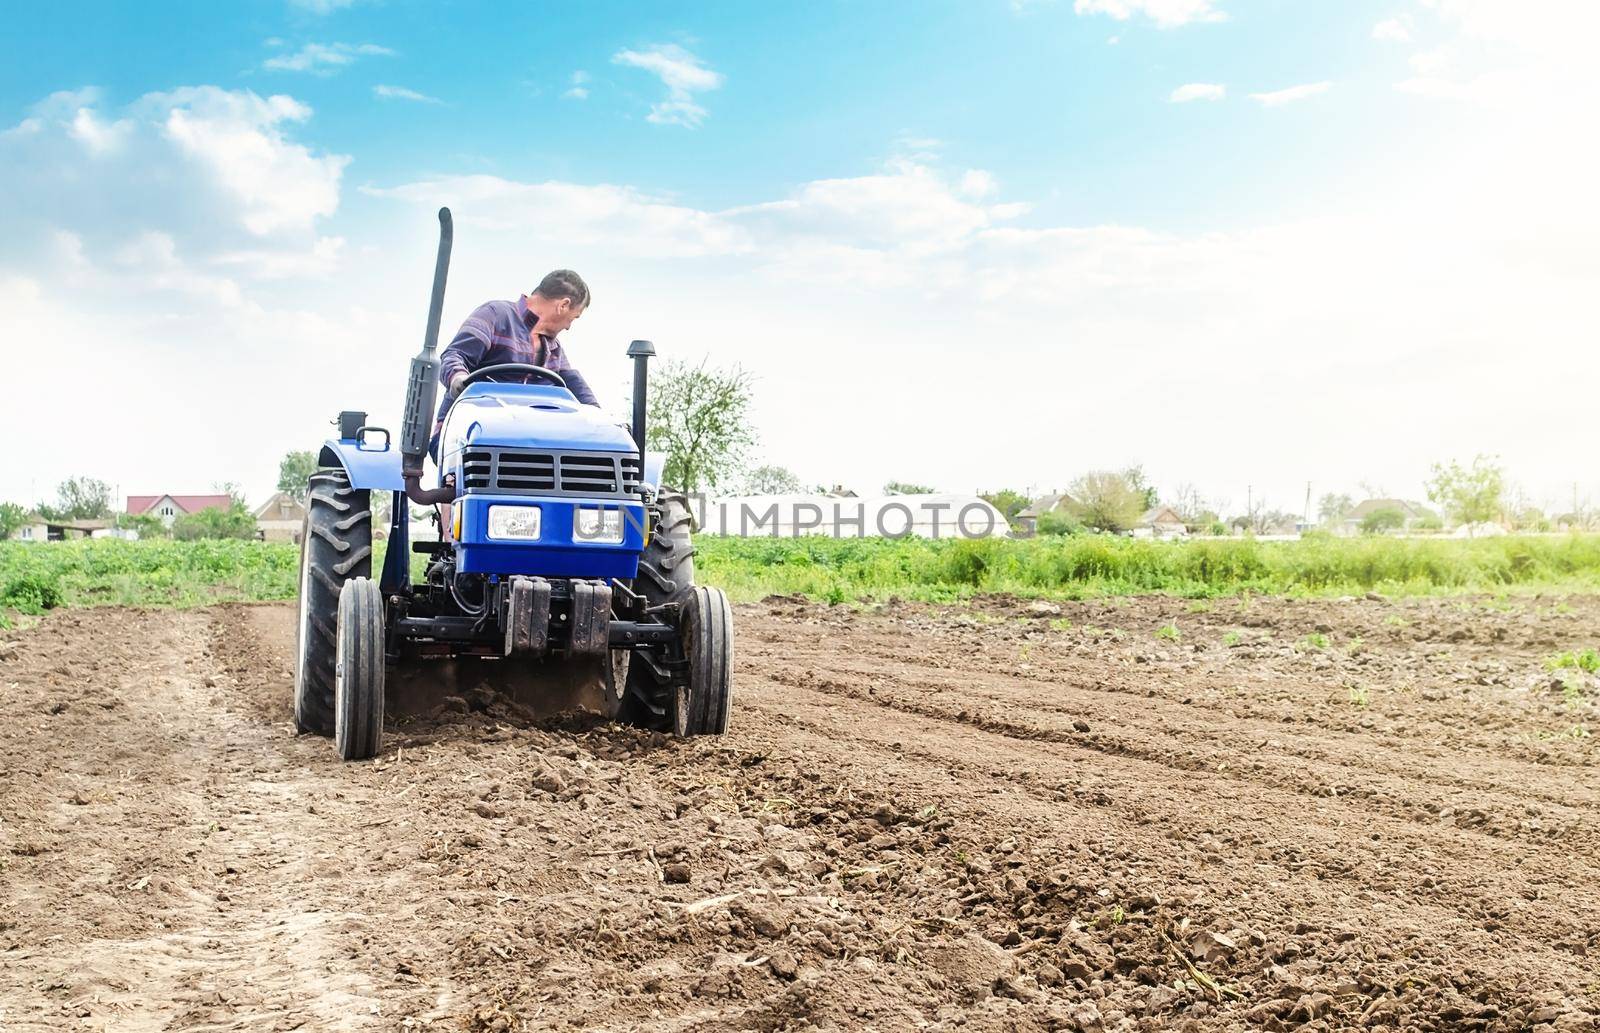 Farmer is processing soil on a tractor. Soil milling, crumbling mixing. Loosening surface, cultivating land for further planting. Agroindustry, farming. Agriculture, growing organic food vegetables